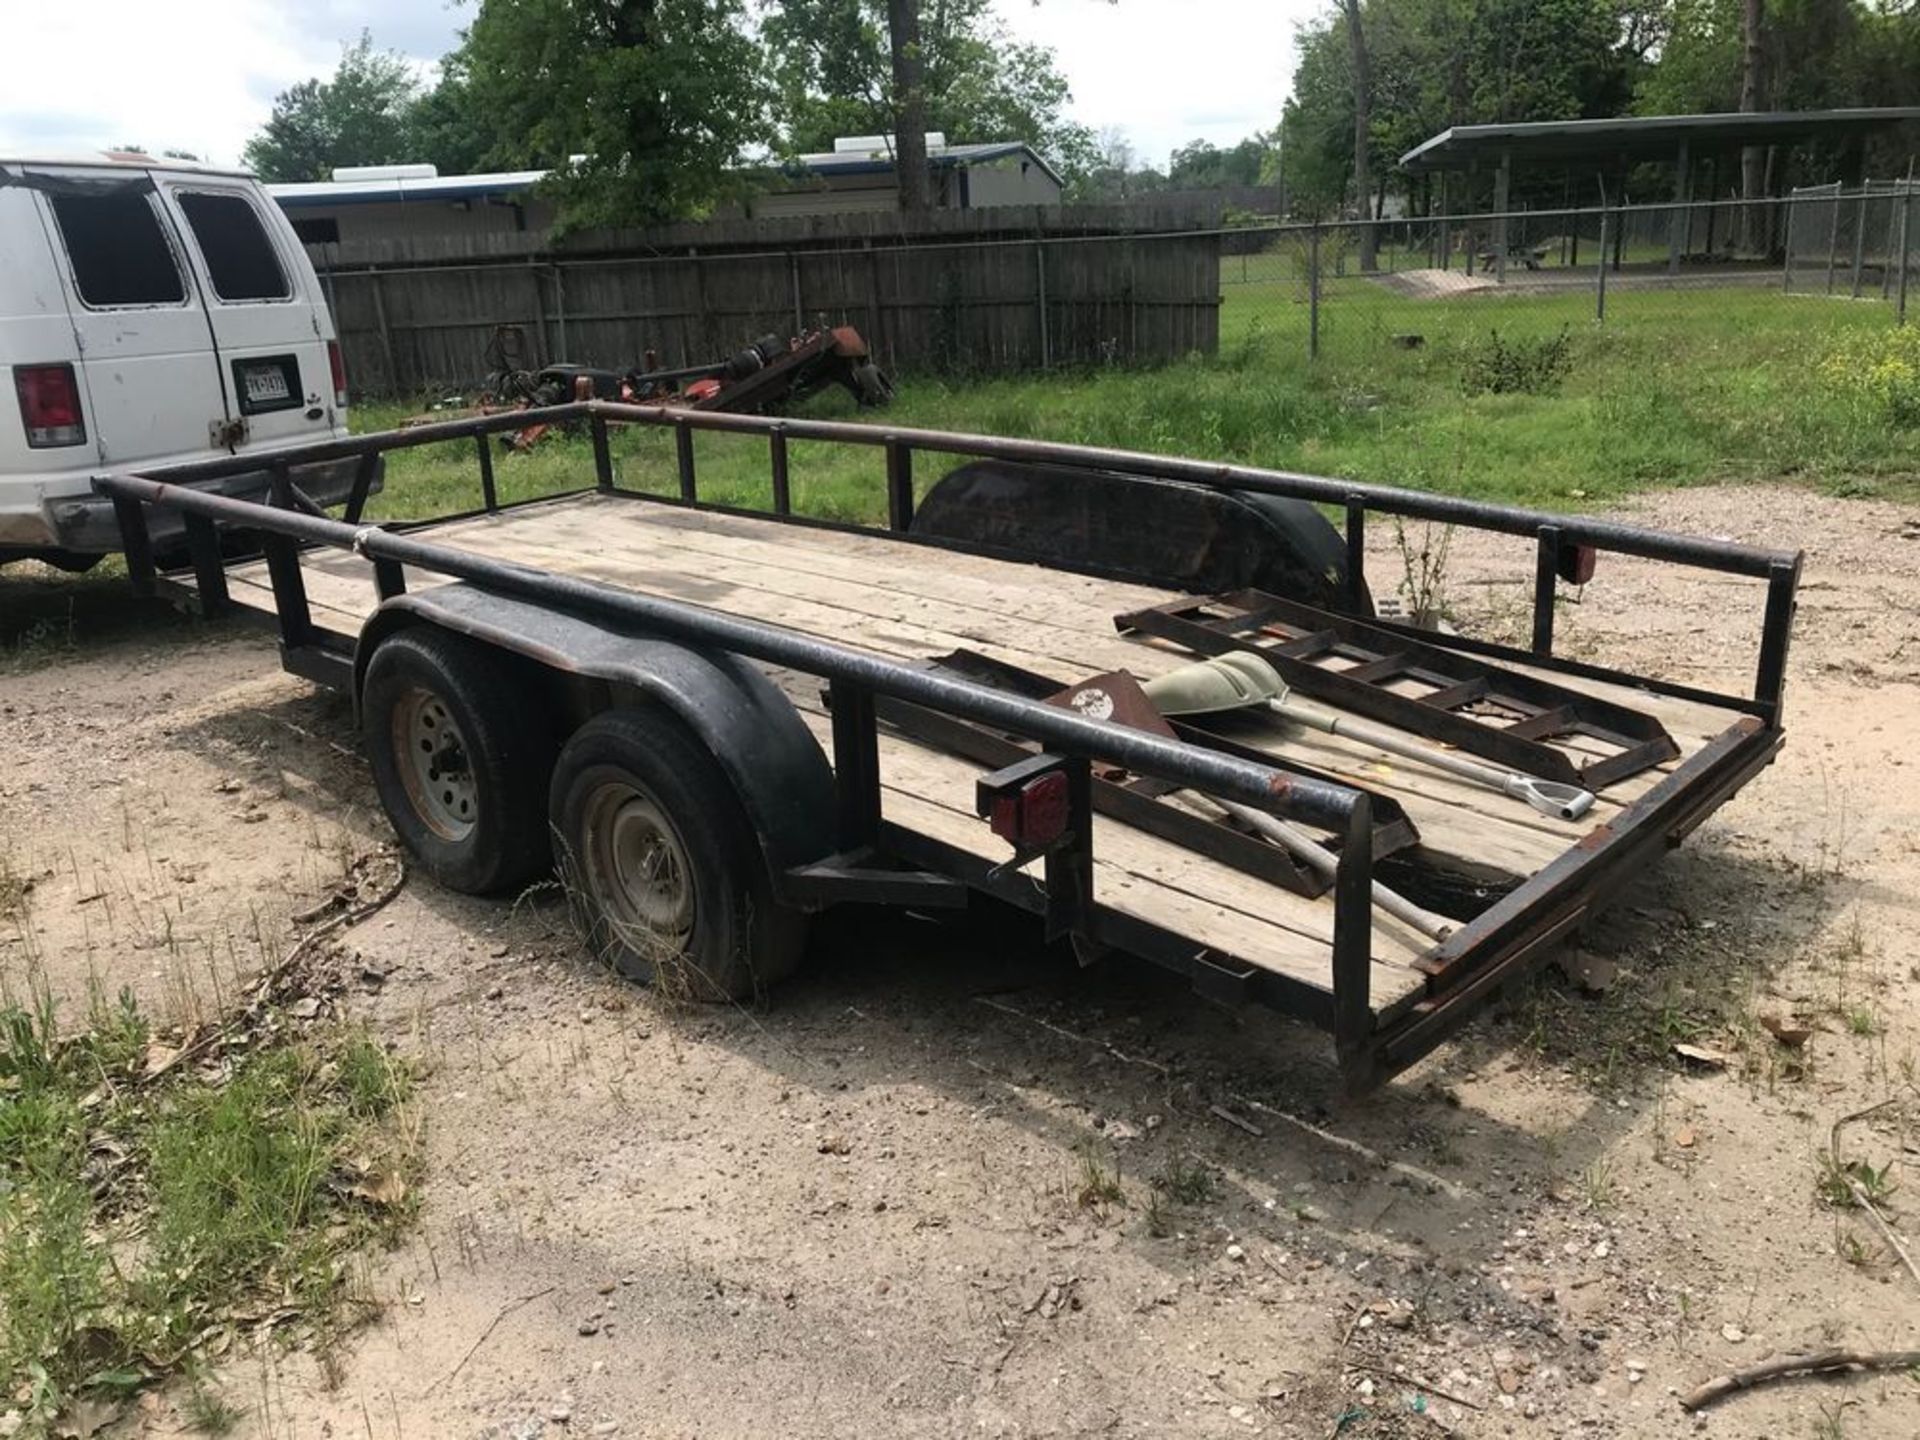 7'W x 16'L T/A Utility Trailer w/ Loading Ramps, 4500 GVWR, Bumper Pull Hitch - Image 2 of 5